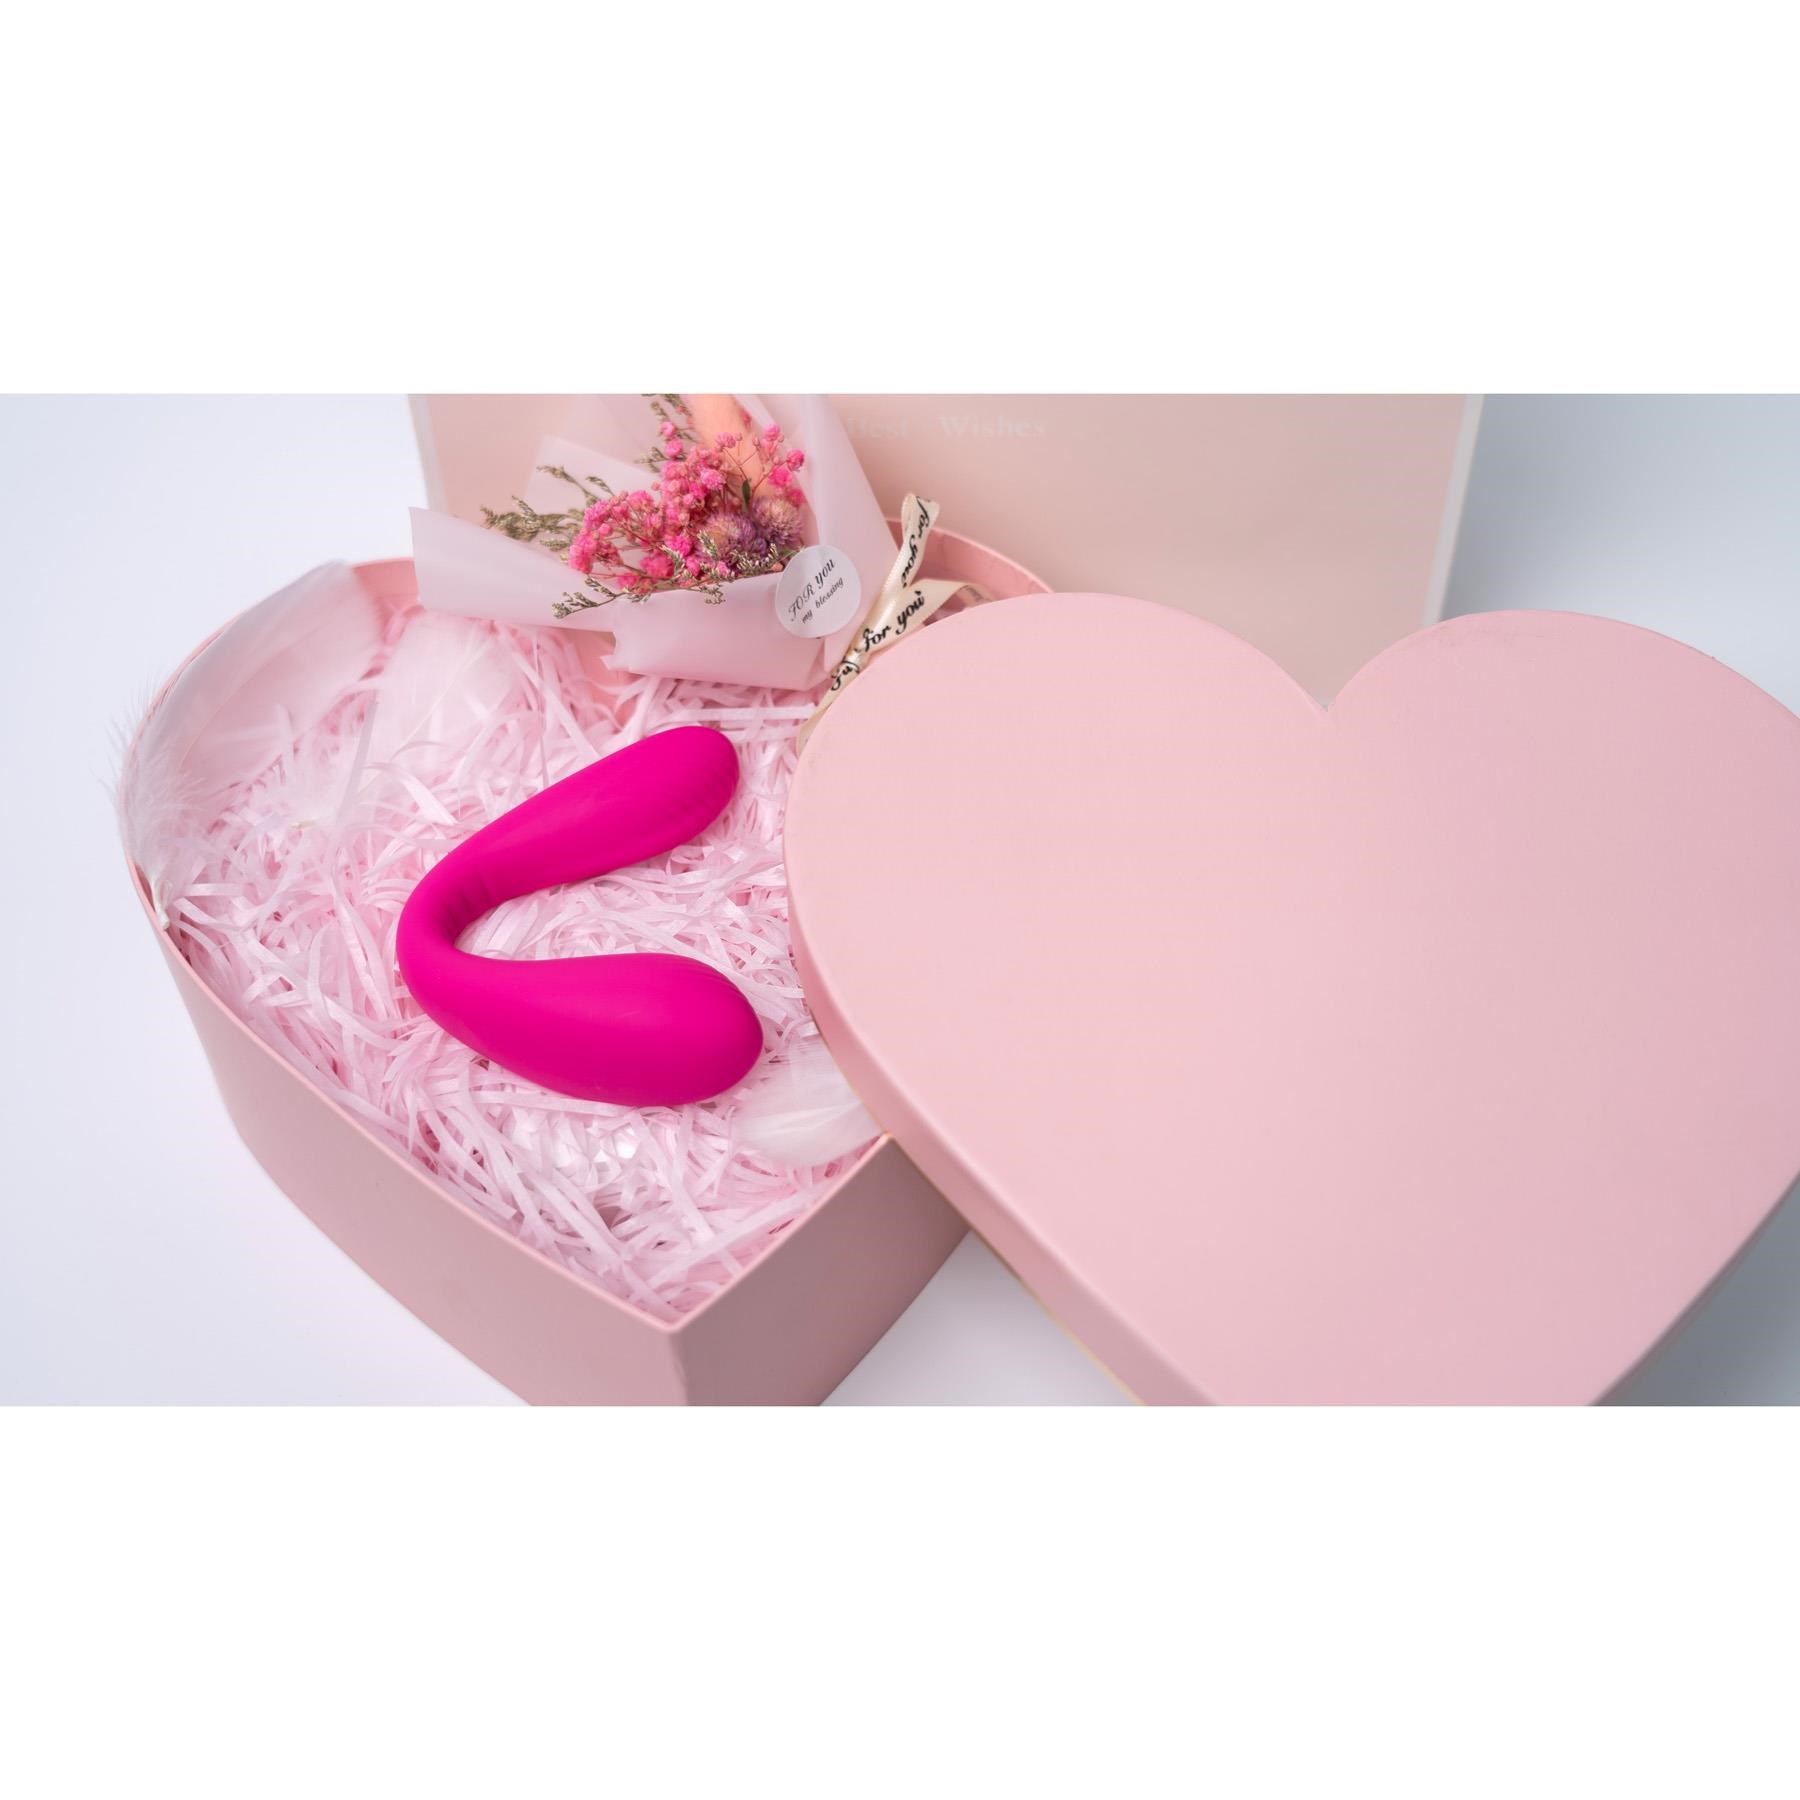 Lovense Dolce Bluetooth Dual Vibrator - Product Shot in Heart Box